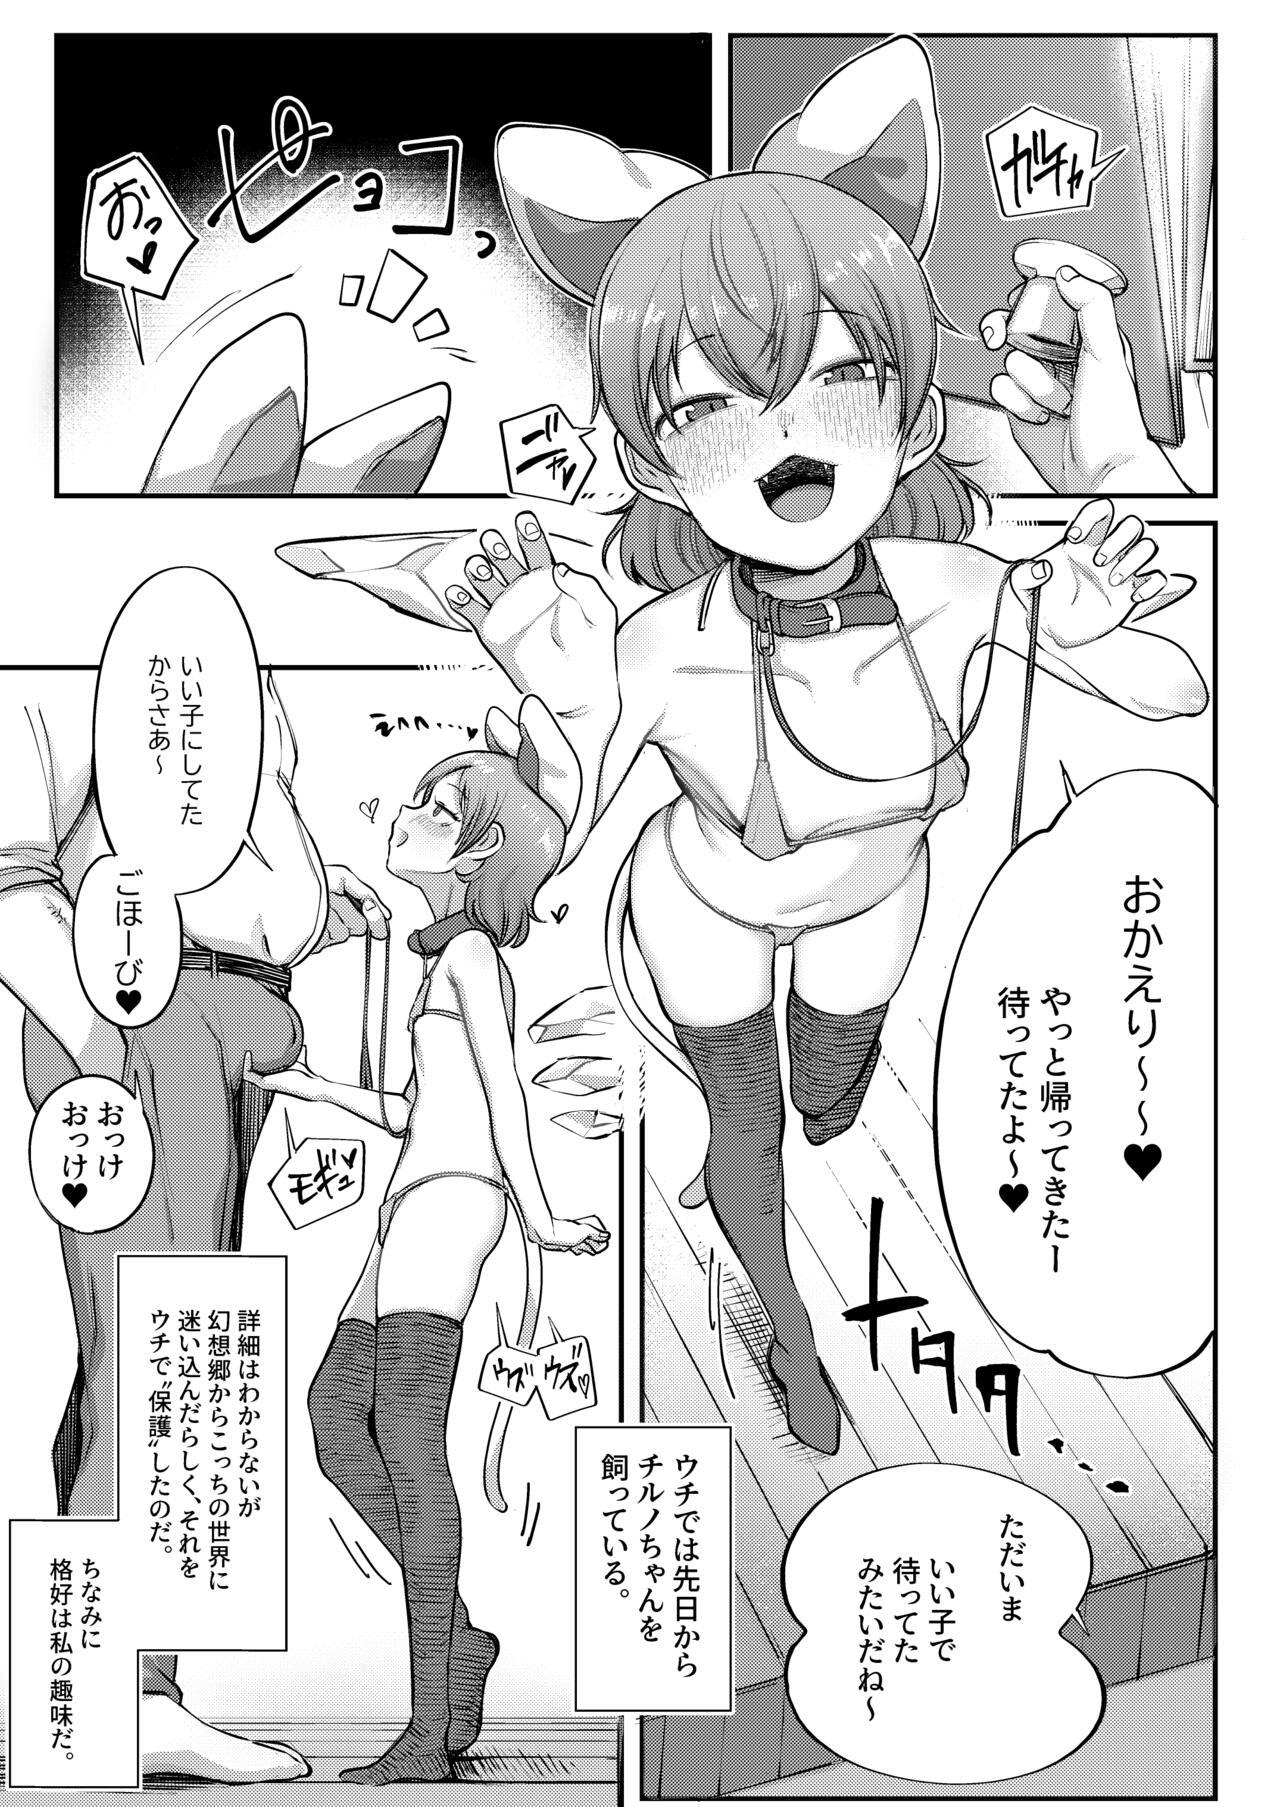 Butt Plug Cirno to Cirno - Touhou project Gaycum - Page 2